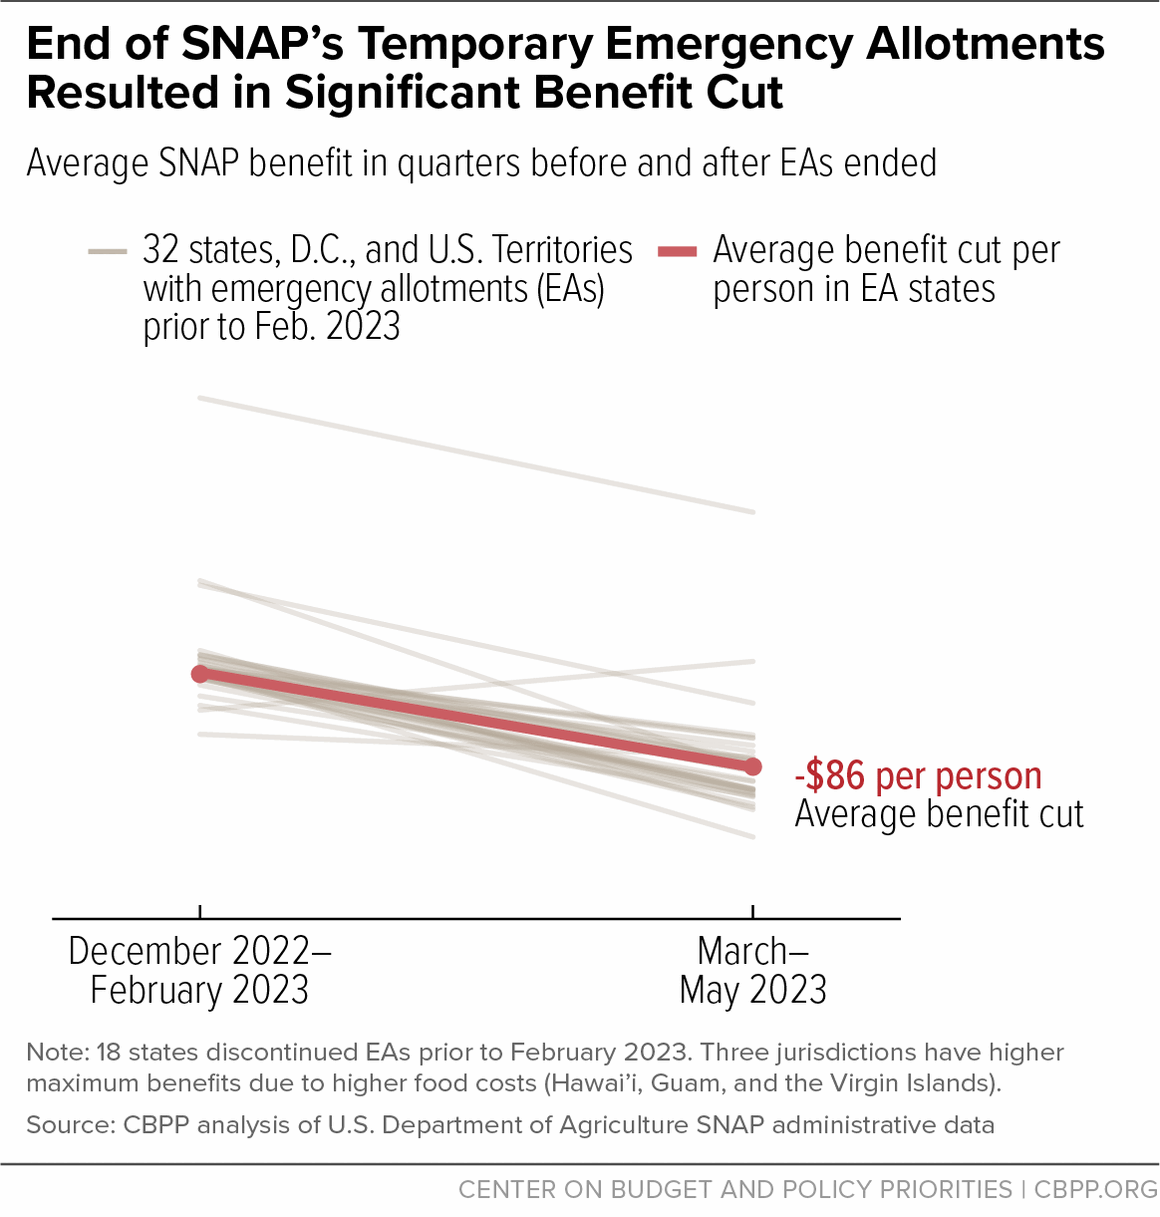 End of SNAP's Temporary Emergency Allotments Resulted in Significant Benefit Cut